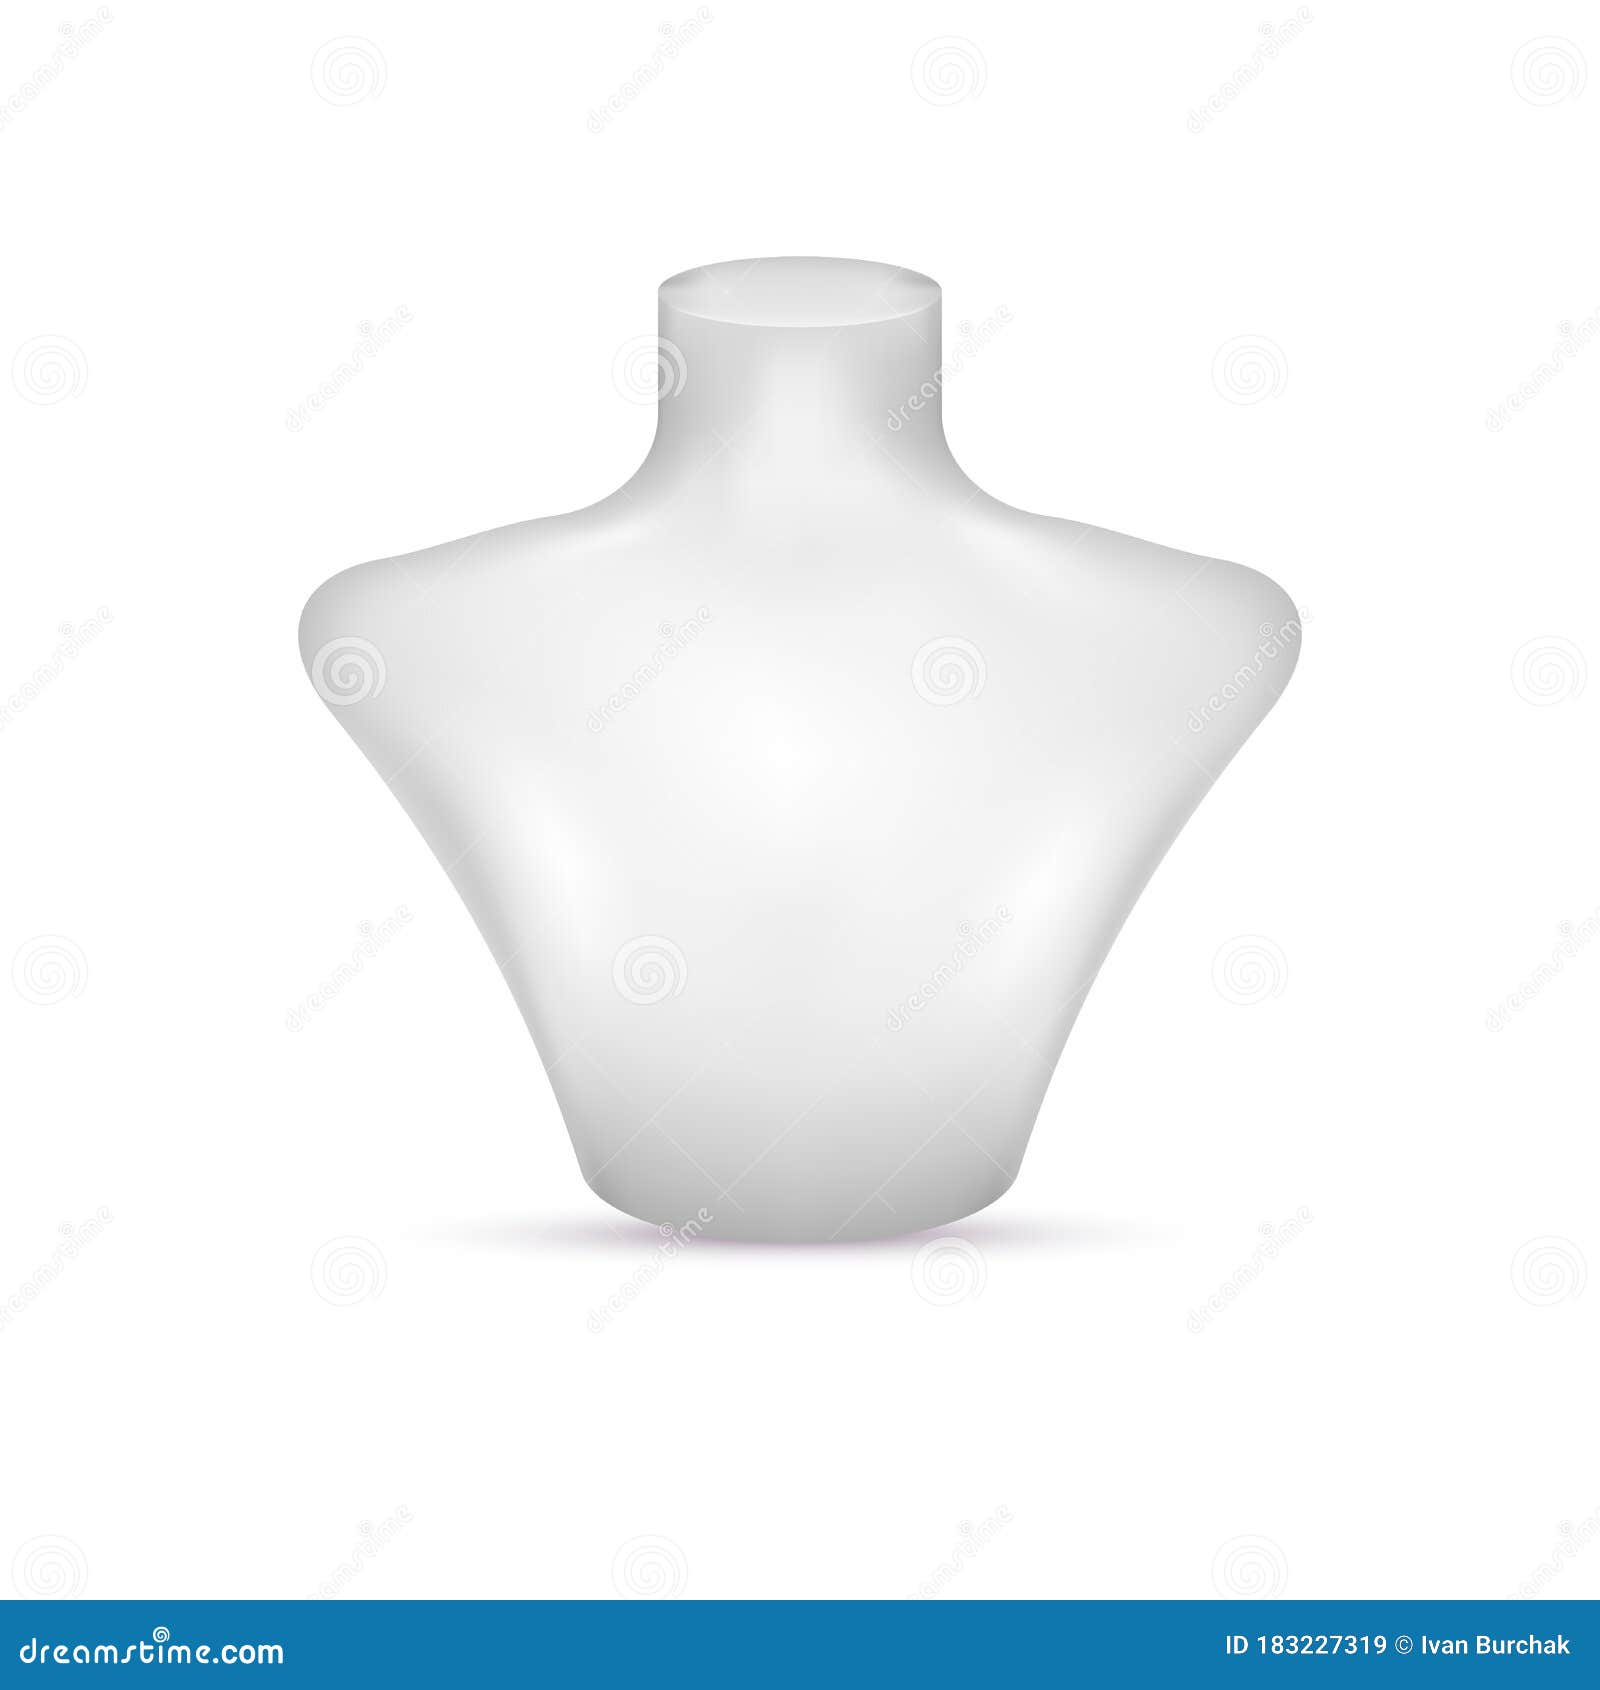 Mannequin bust and head Royalty Free Vector Image